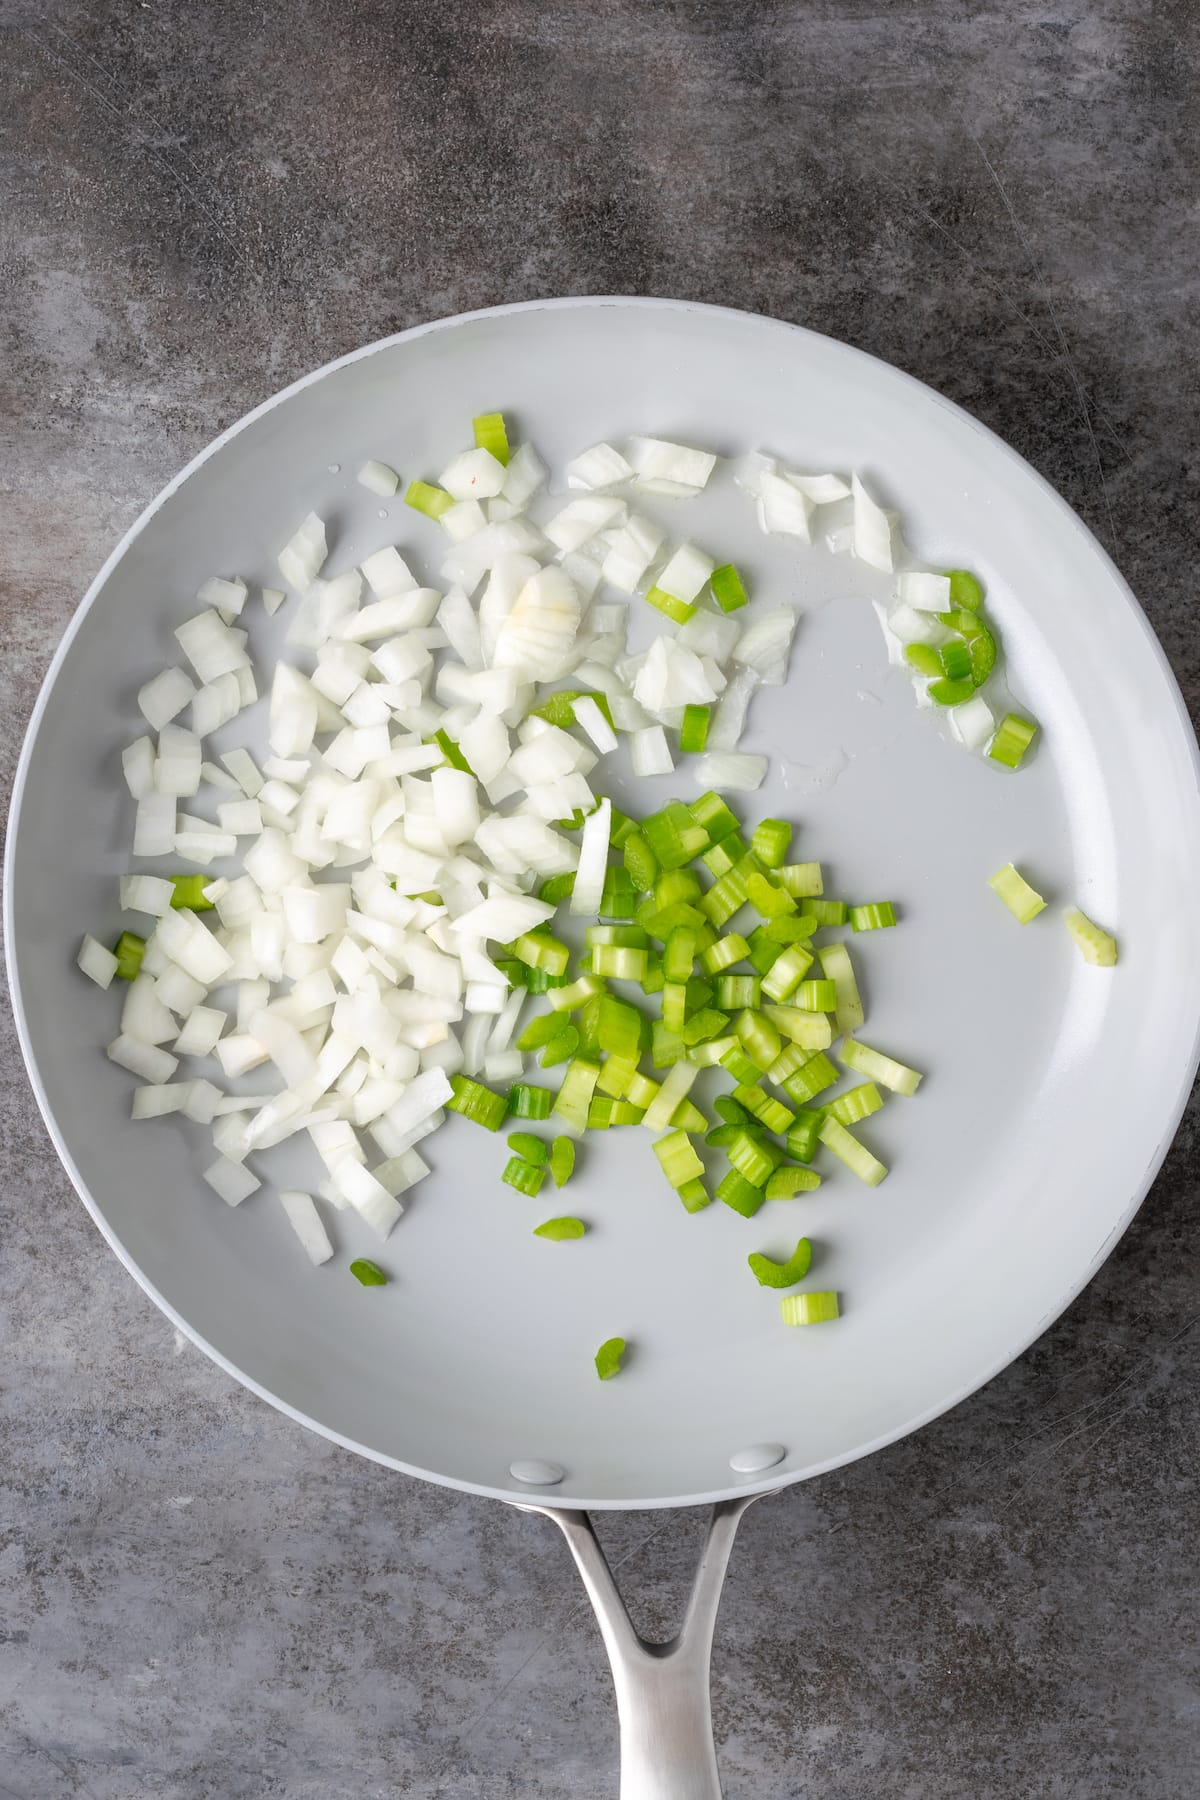 Diced celery and onion in a skillet.